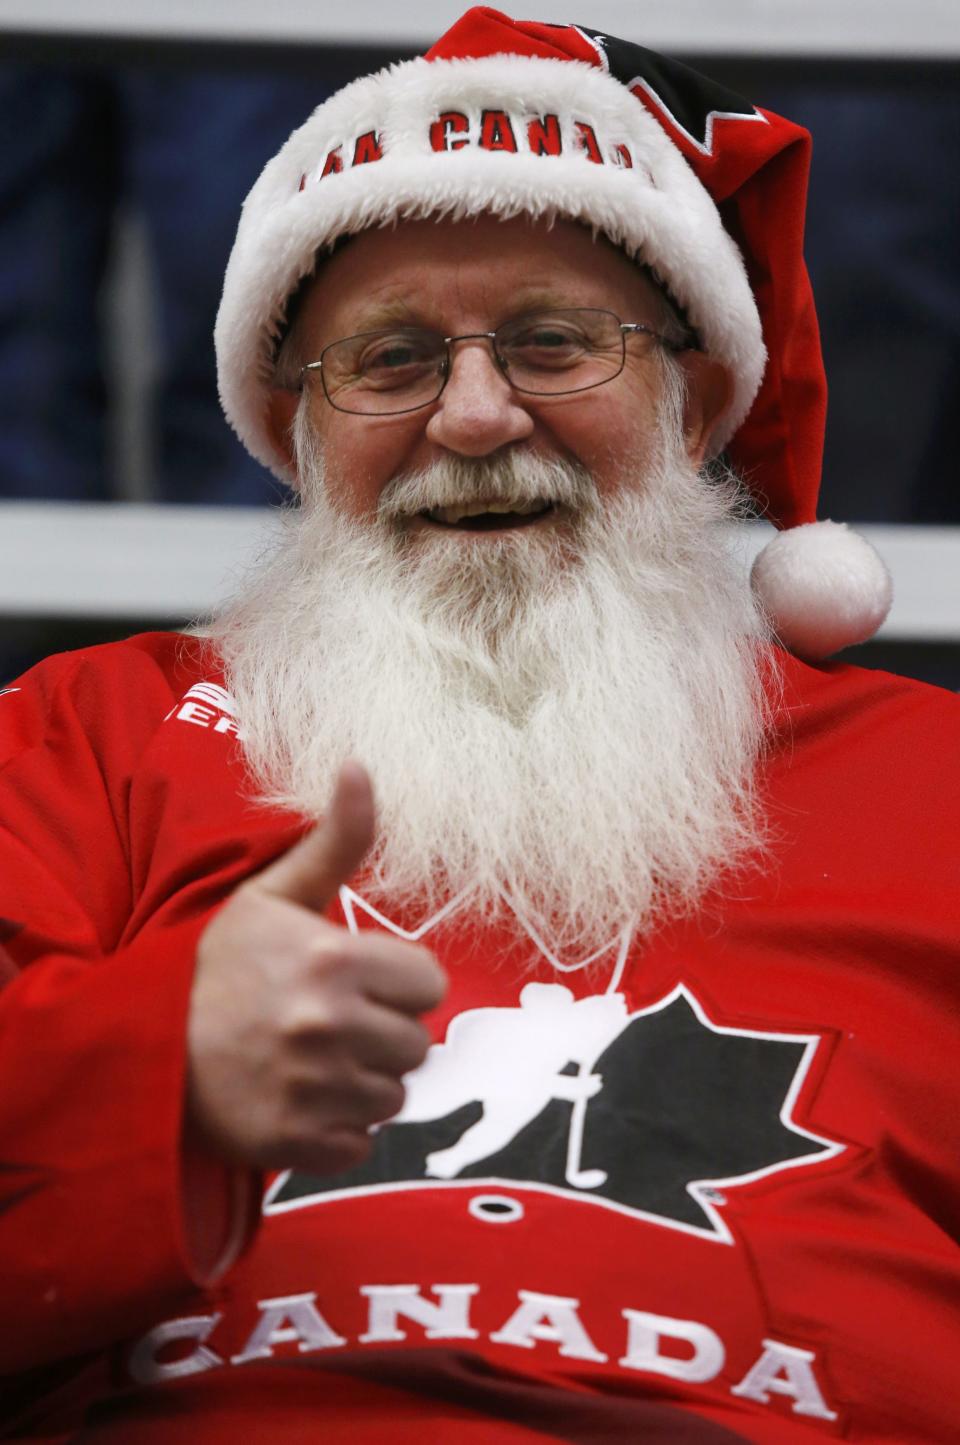 A Canadian supporter cheers before Canada plays United States in their IIHF World Junior Championship ice hockey game in Malmo